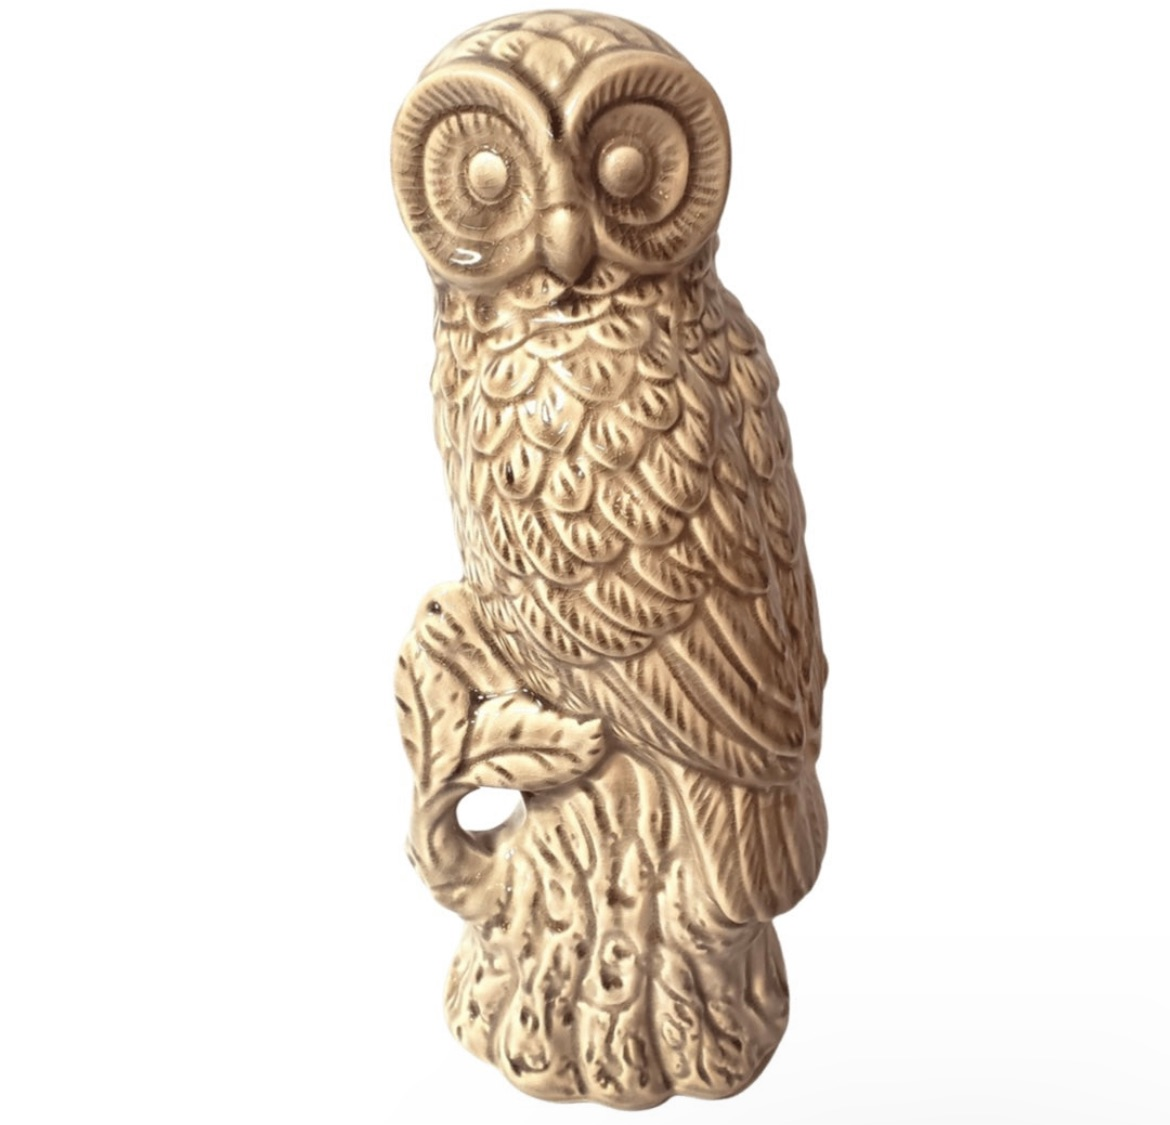 Owl Ceramic Table Decor - Available in 2 Styles